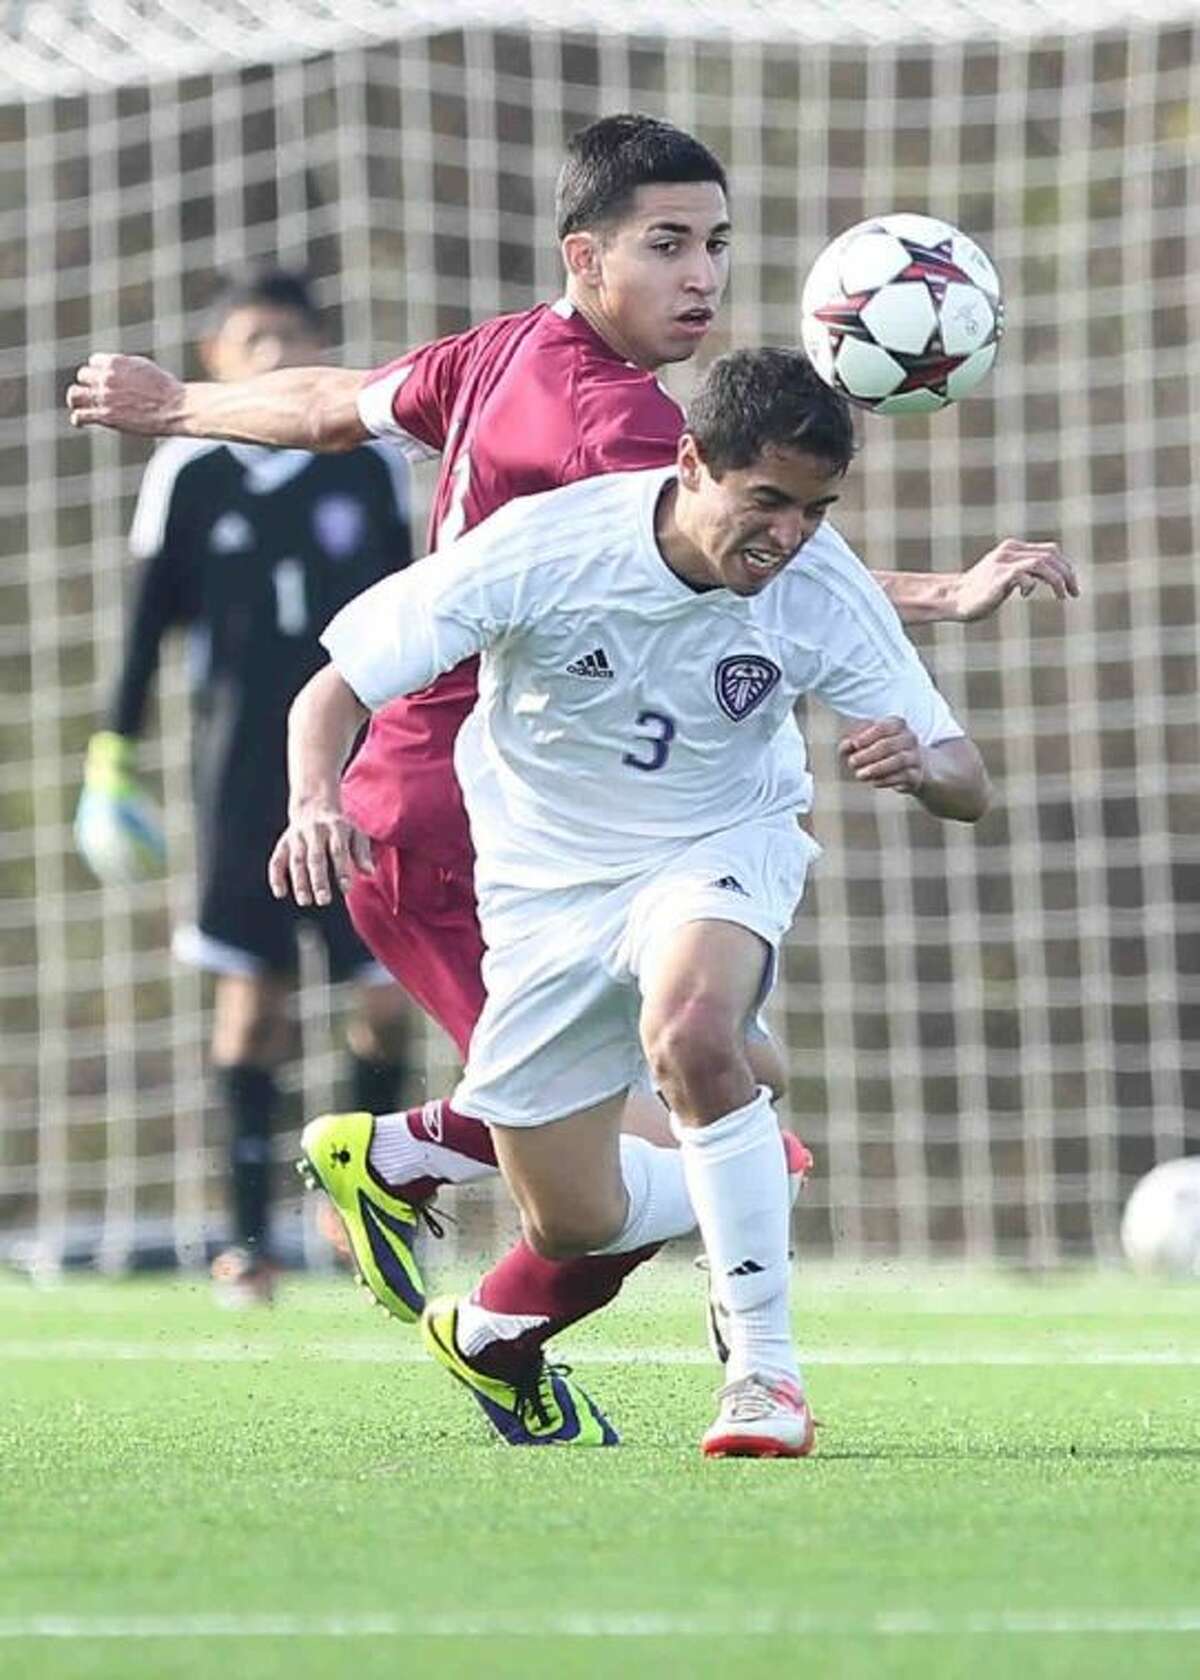 Willis defender AJ Corona heads the ball during a match against Baytown Lee early this season.